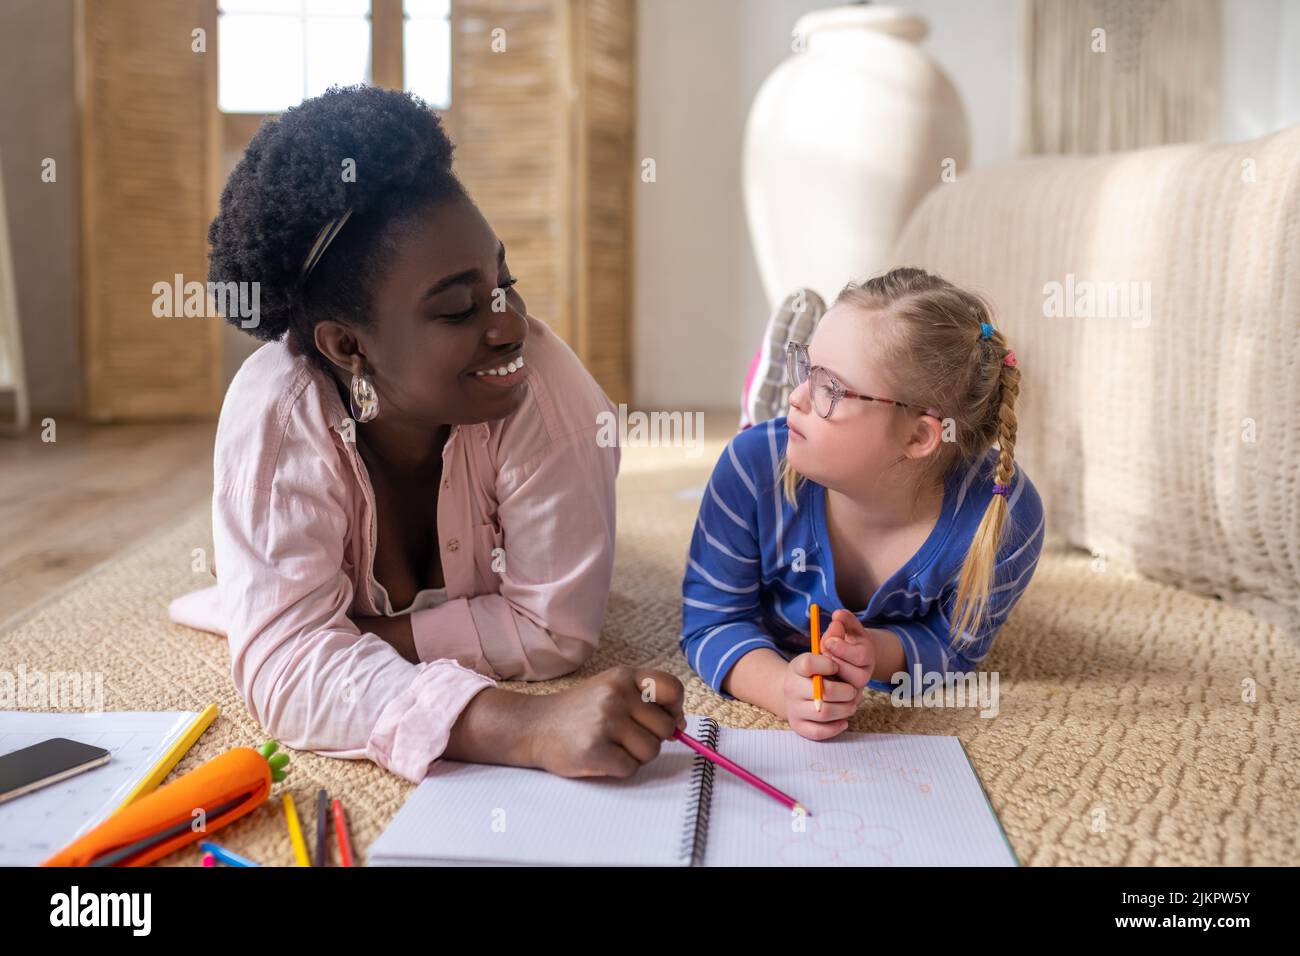 A girl in eyeglasses looking at her teacher whule studying at home Stock Photo